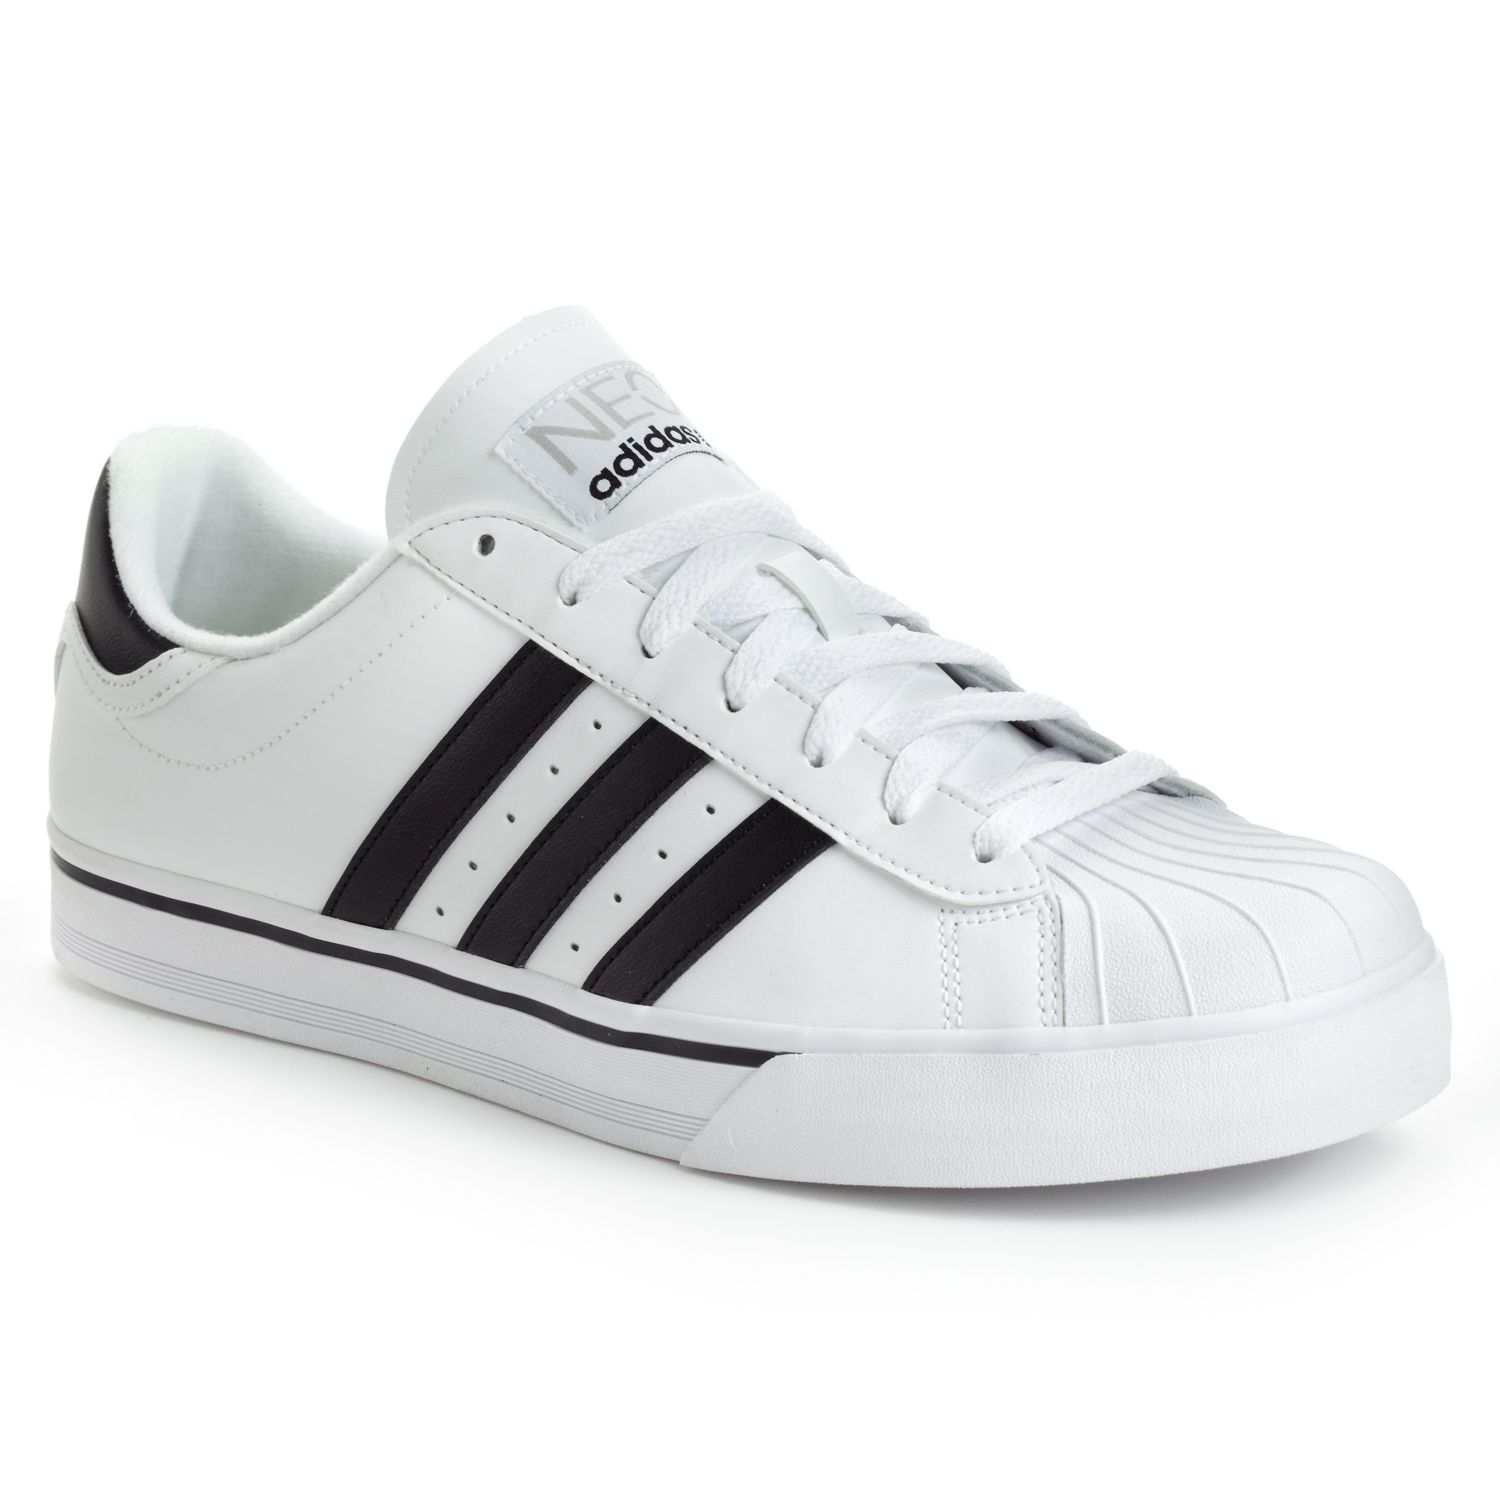 adidas neo shoes for men